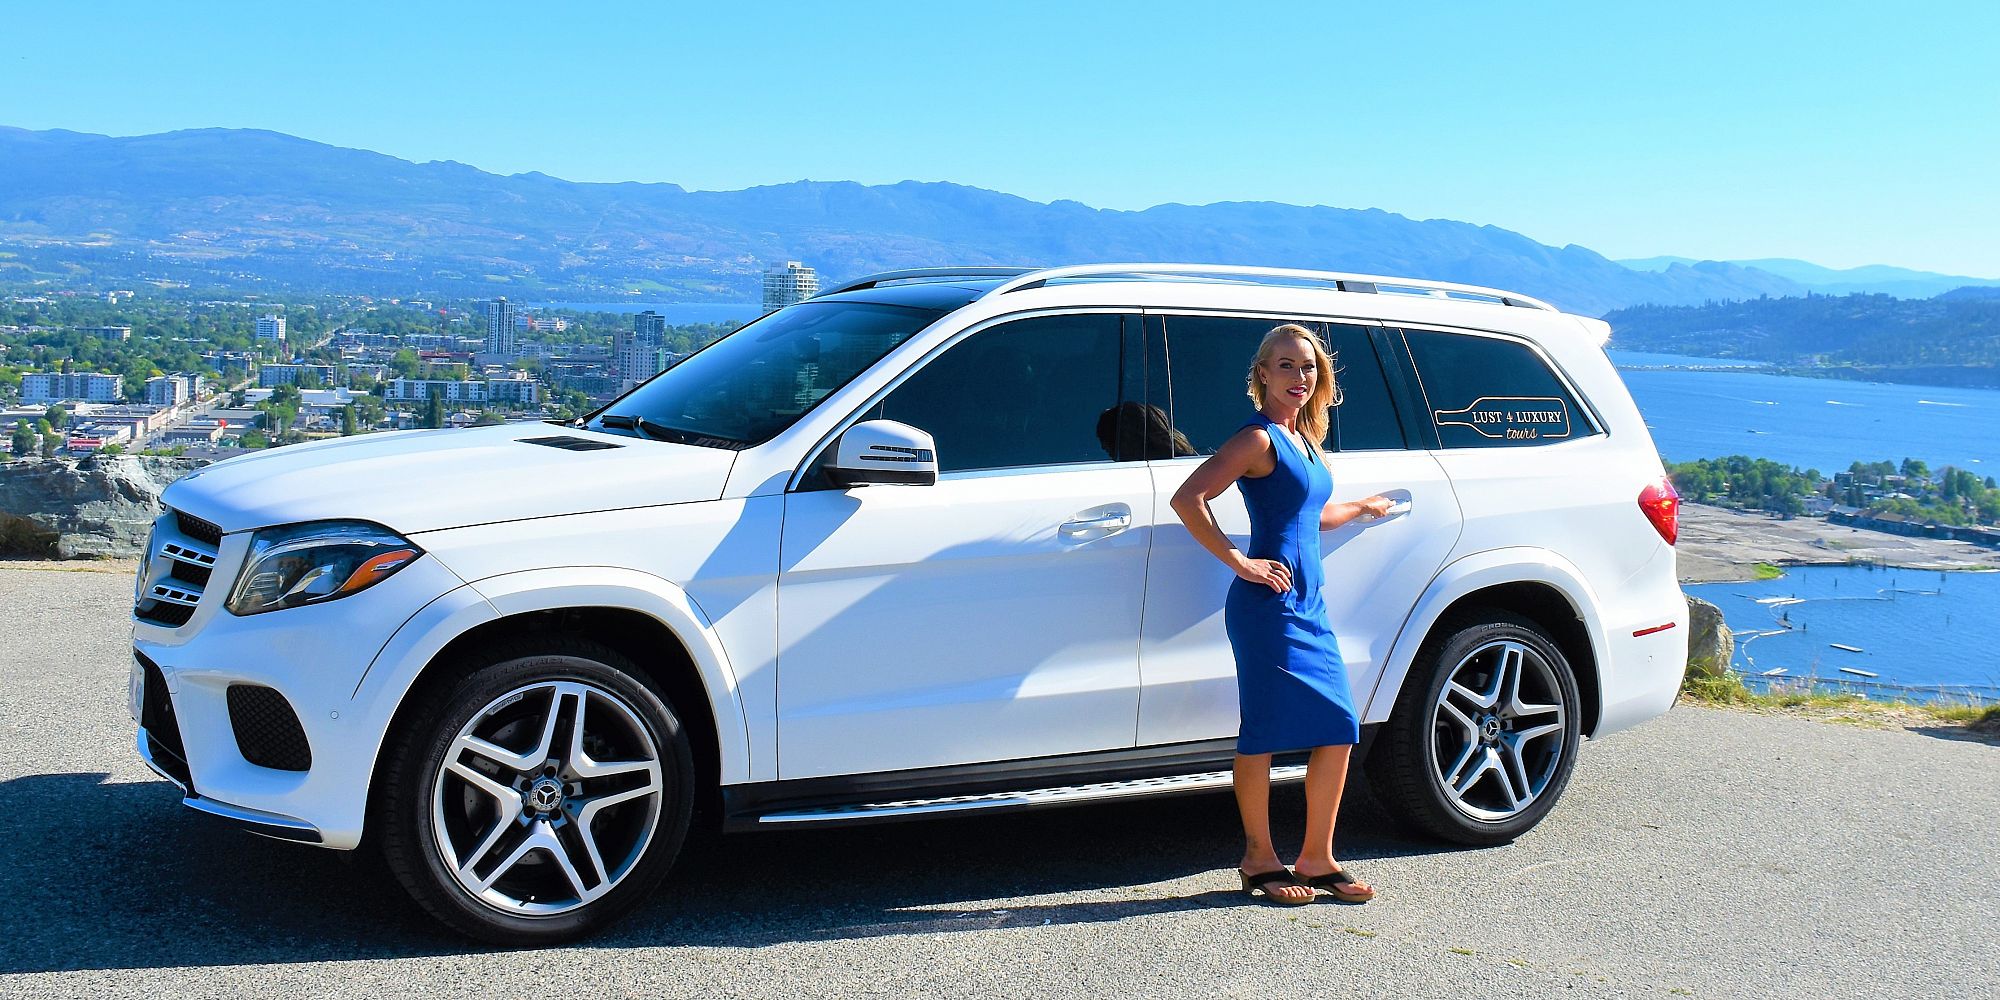 Stacey Lust With The Best Mercedes-Benz Wine Touring Vehicle In Penticton and Naramata, BC